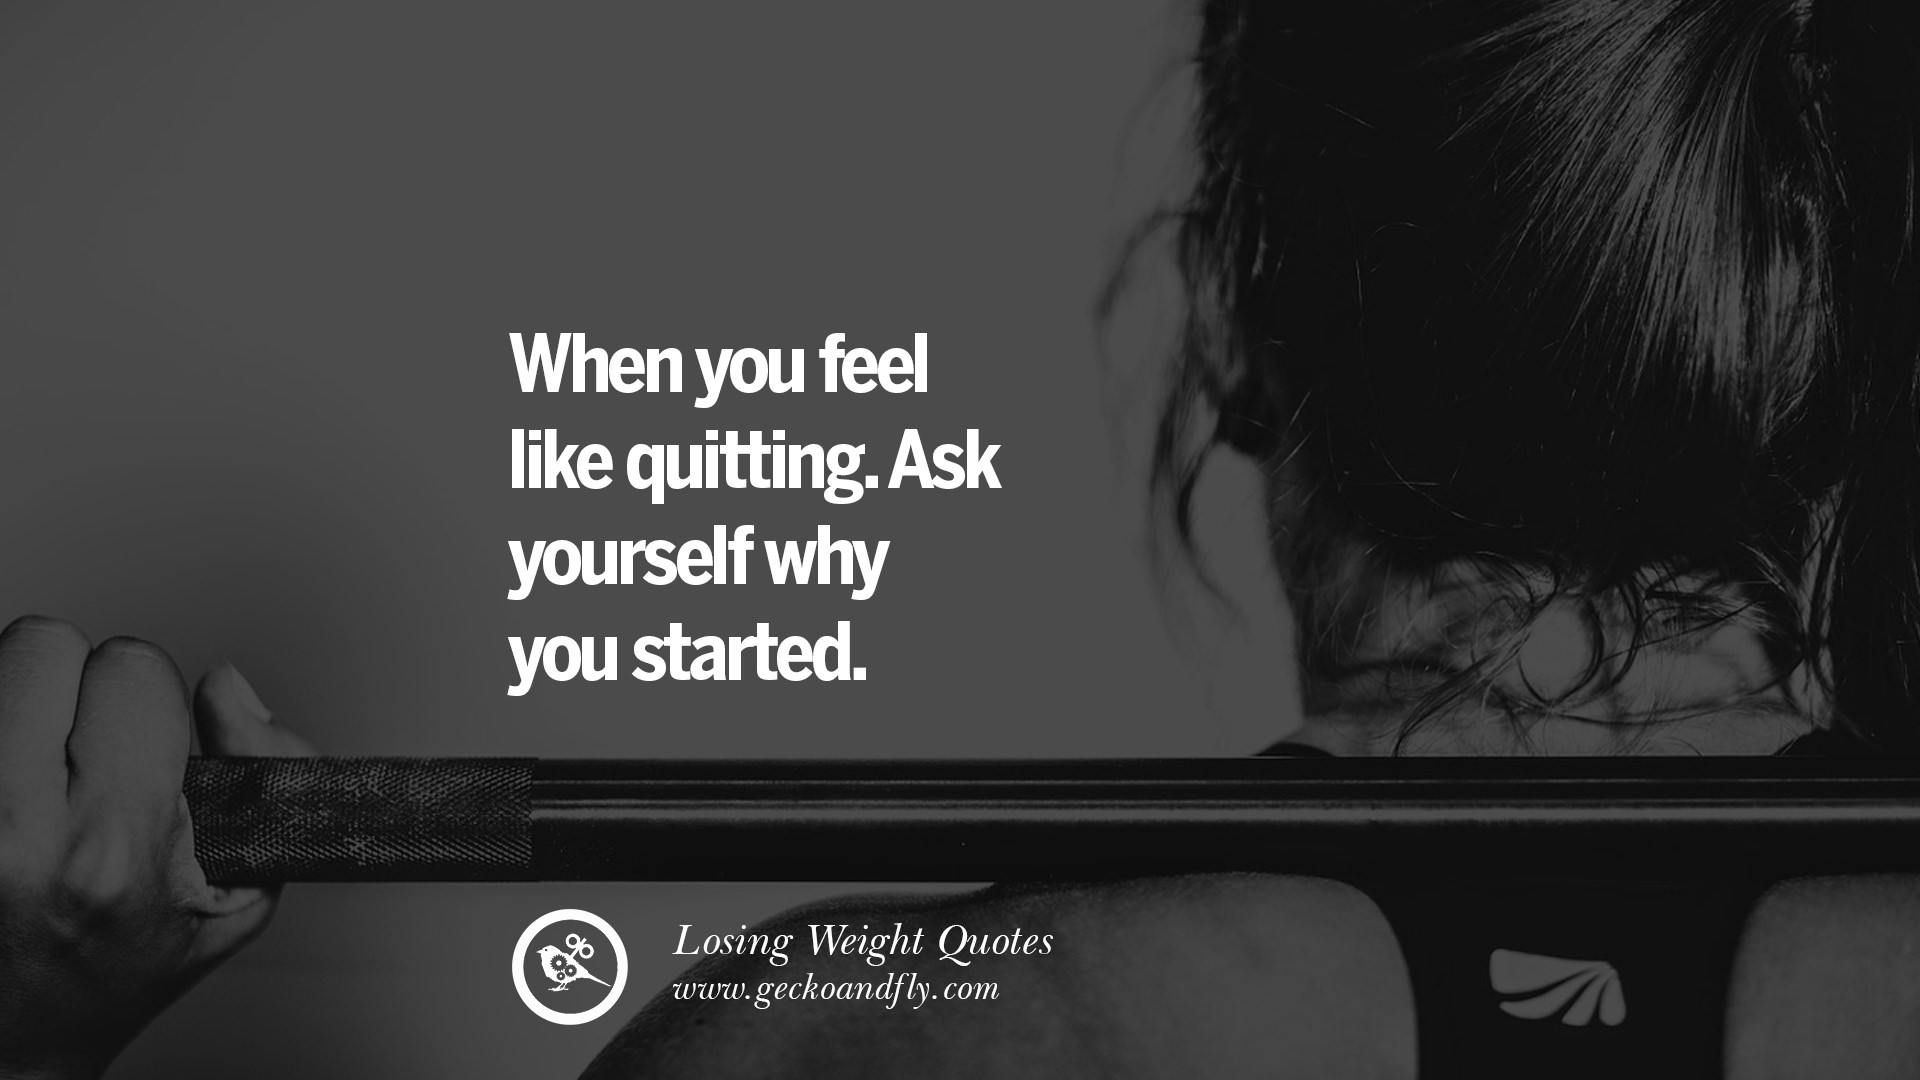 When you feel like quitting. Ask yourself why you started.